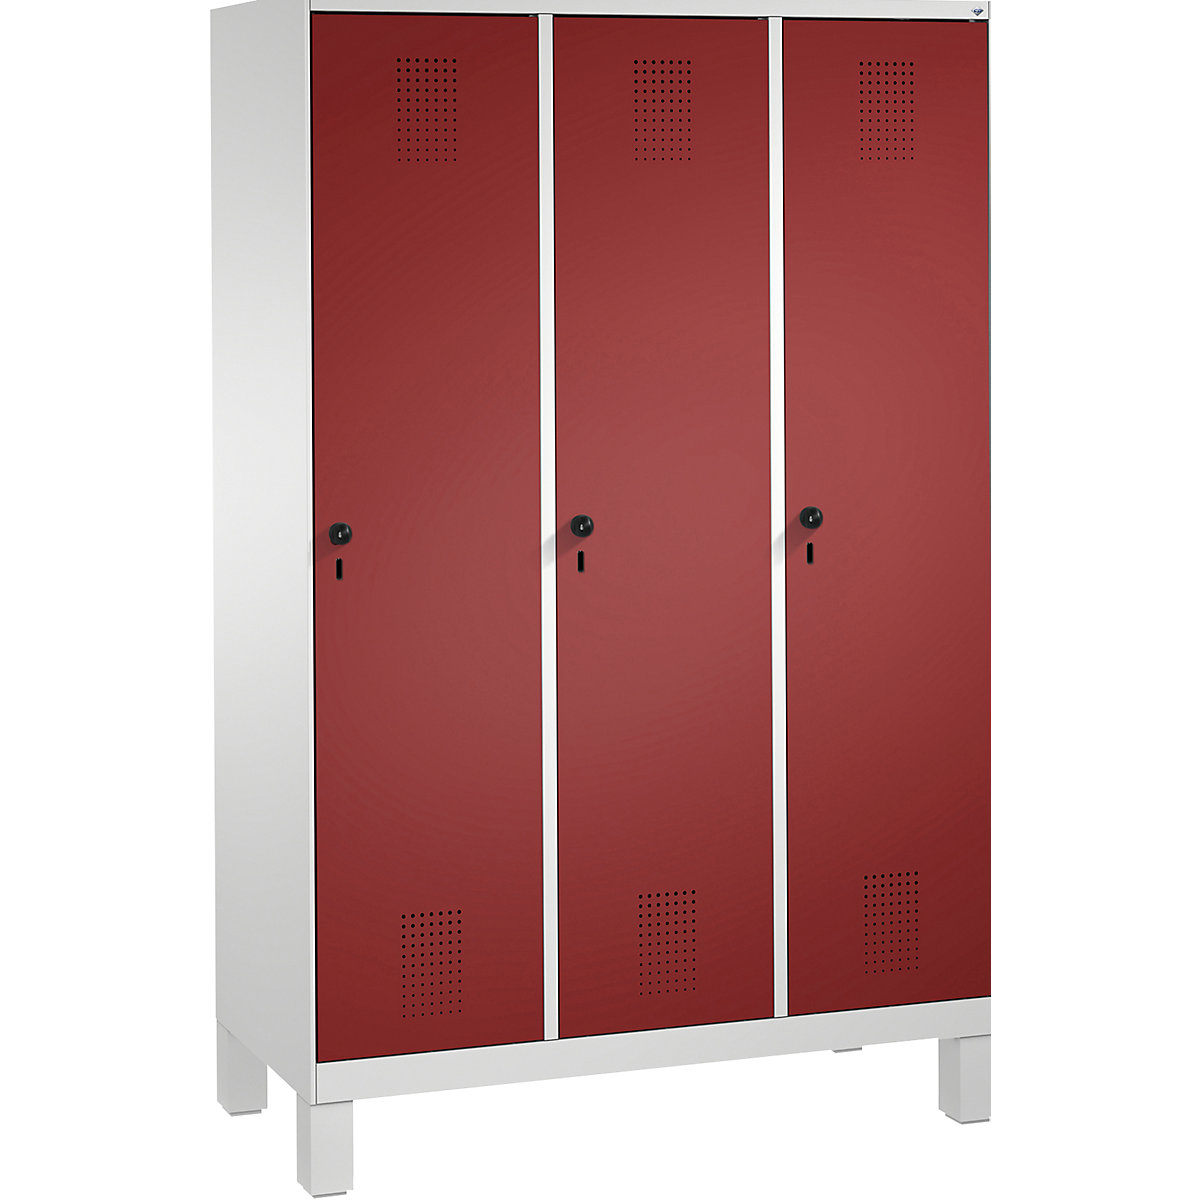 EVOLO cloakroom locker, with feet – C+P, 3 compartments, compartment width 400 mm, light grey / ruby red-14